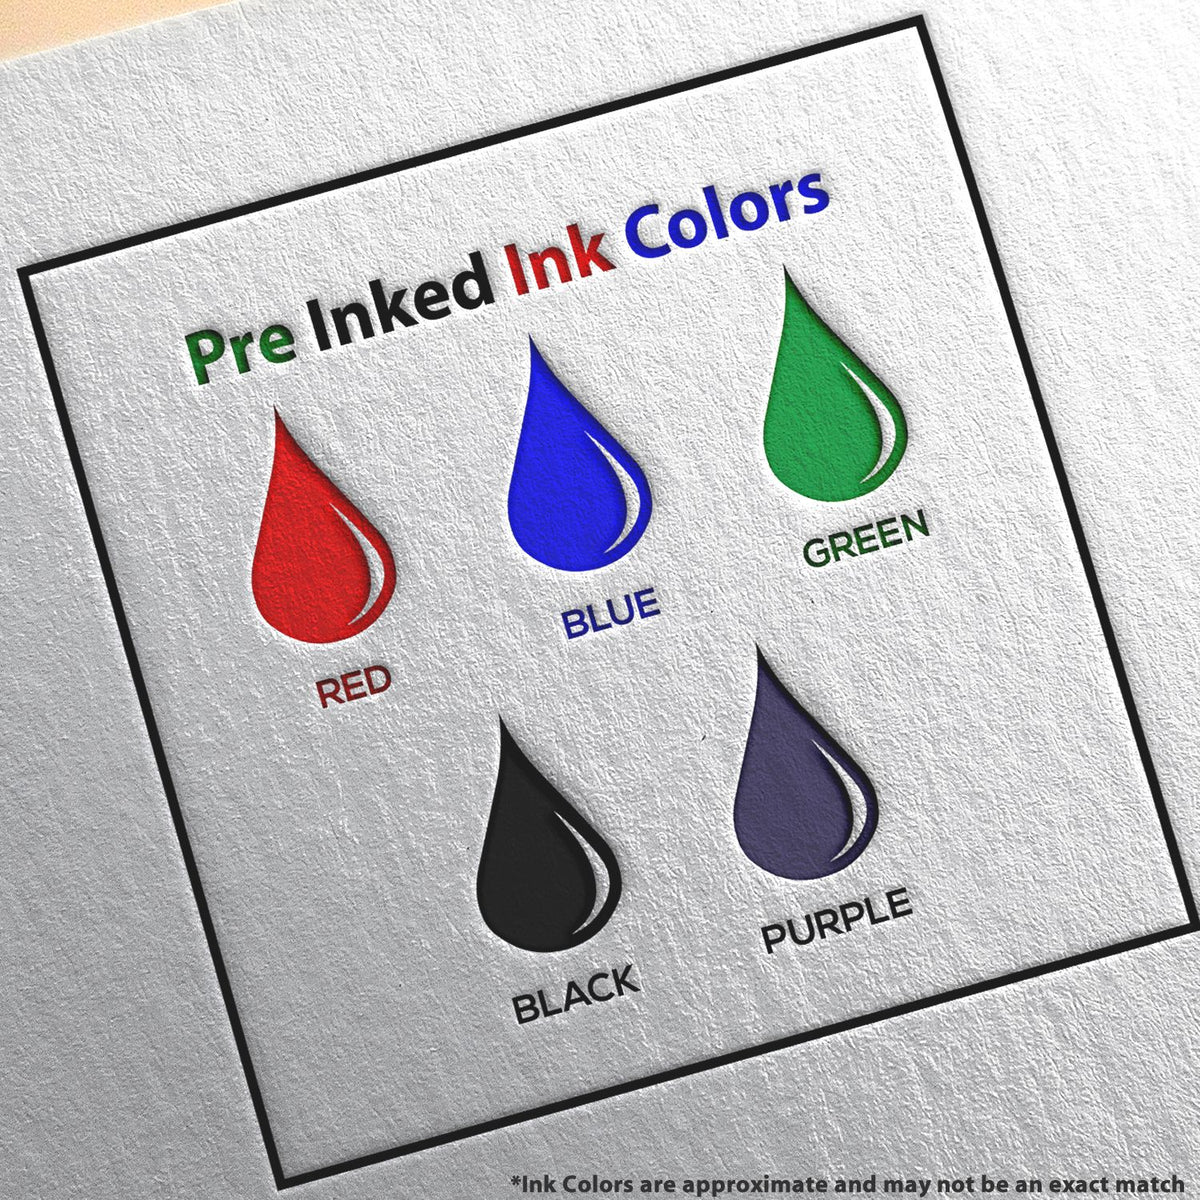 A picture showing the different ink colors or hues available for the Slim Pre-Inked Vermont Professional Engineer Seal Stamp product.